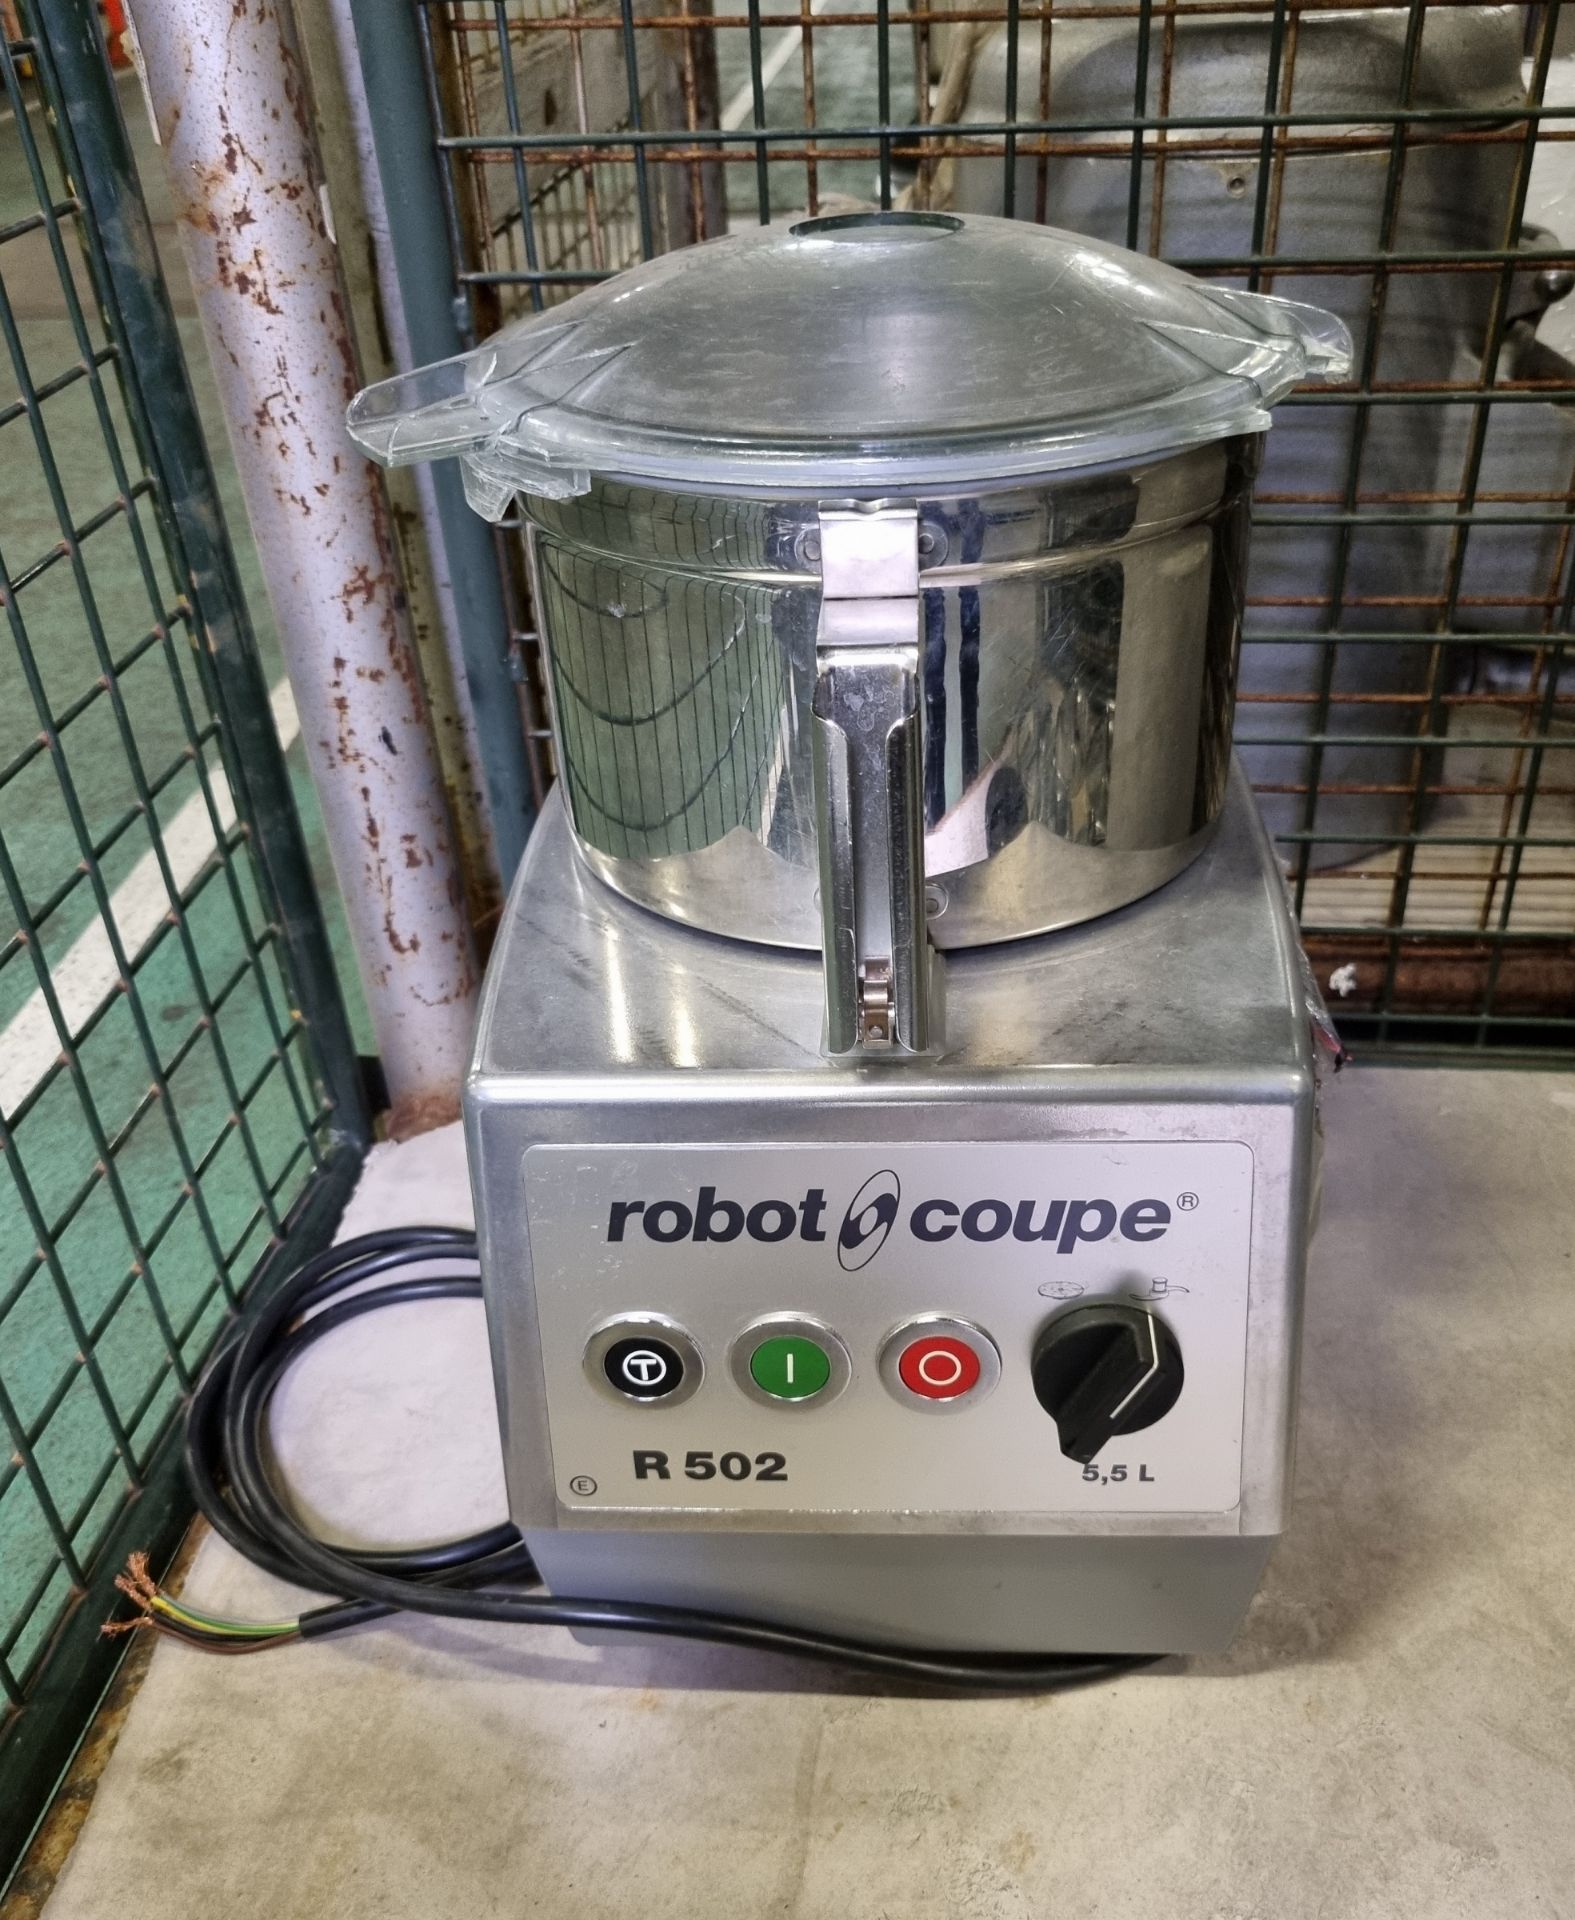 Robot Coupe R 502 food processing machine with bowl and cutting attachment - Image 4 of 6